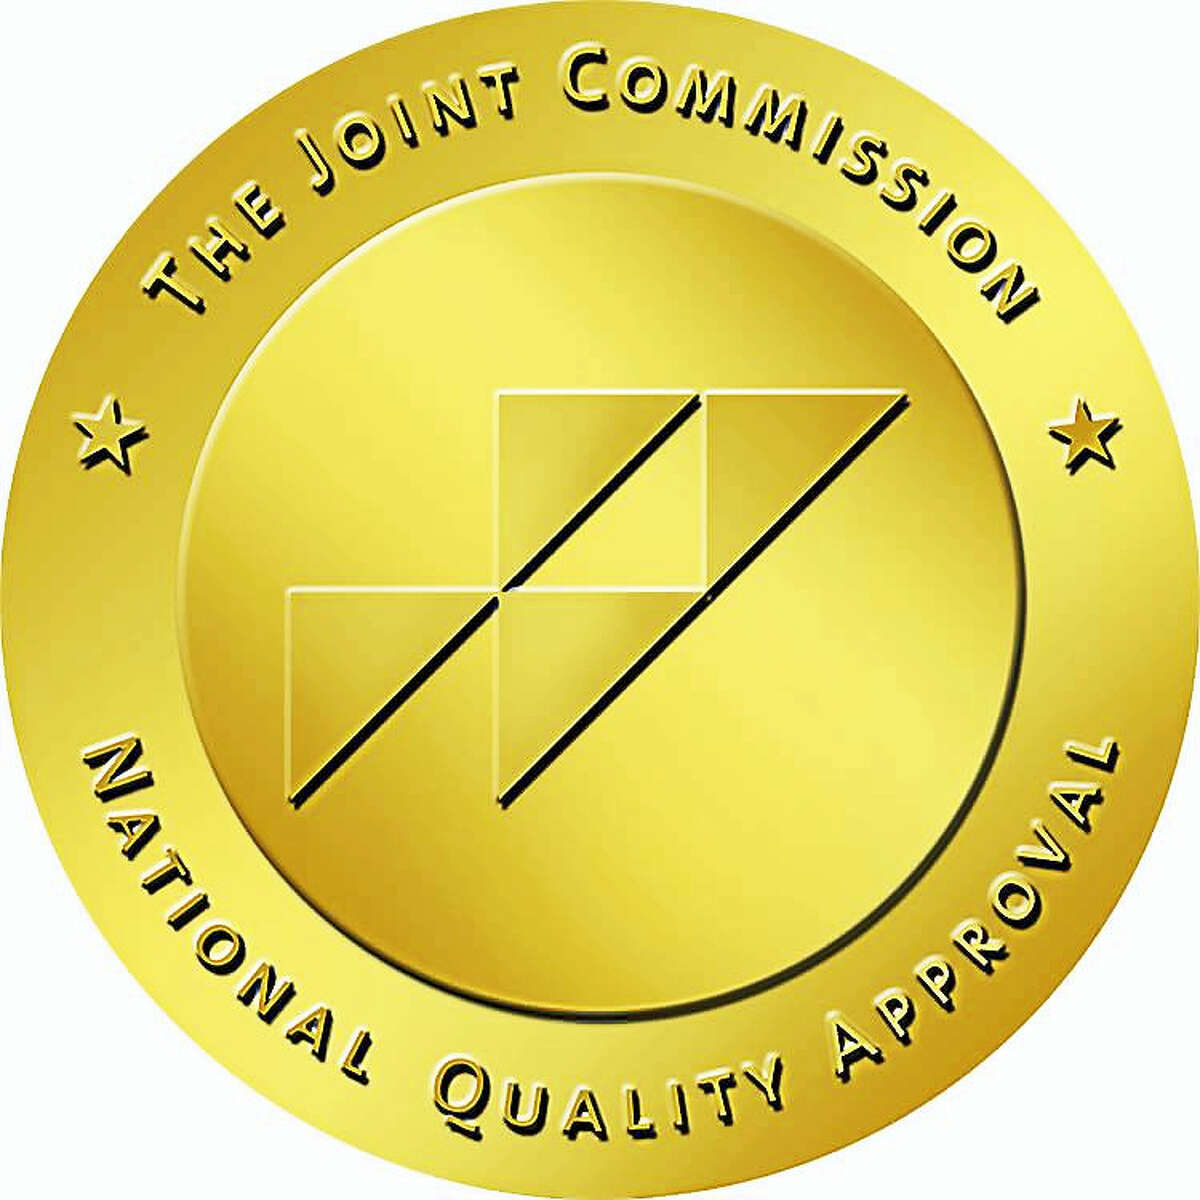 The seal of the Joint Commission of National Quality.